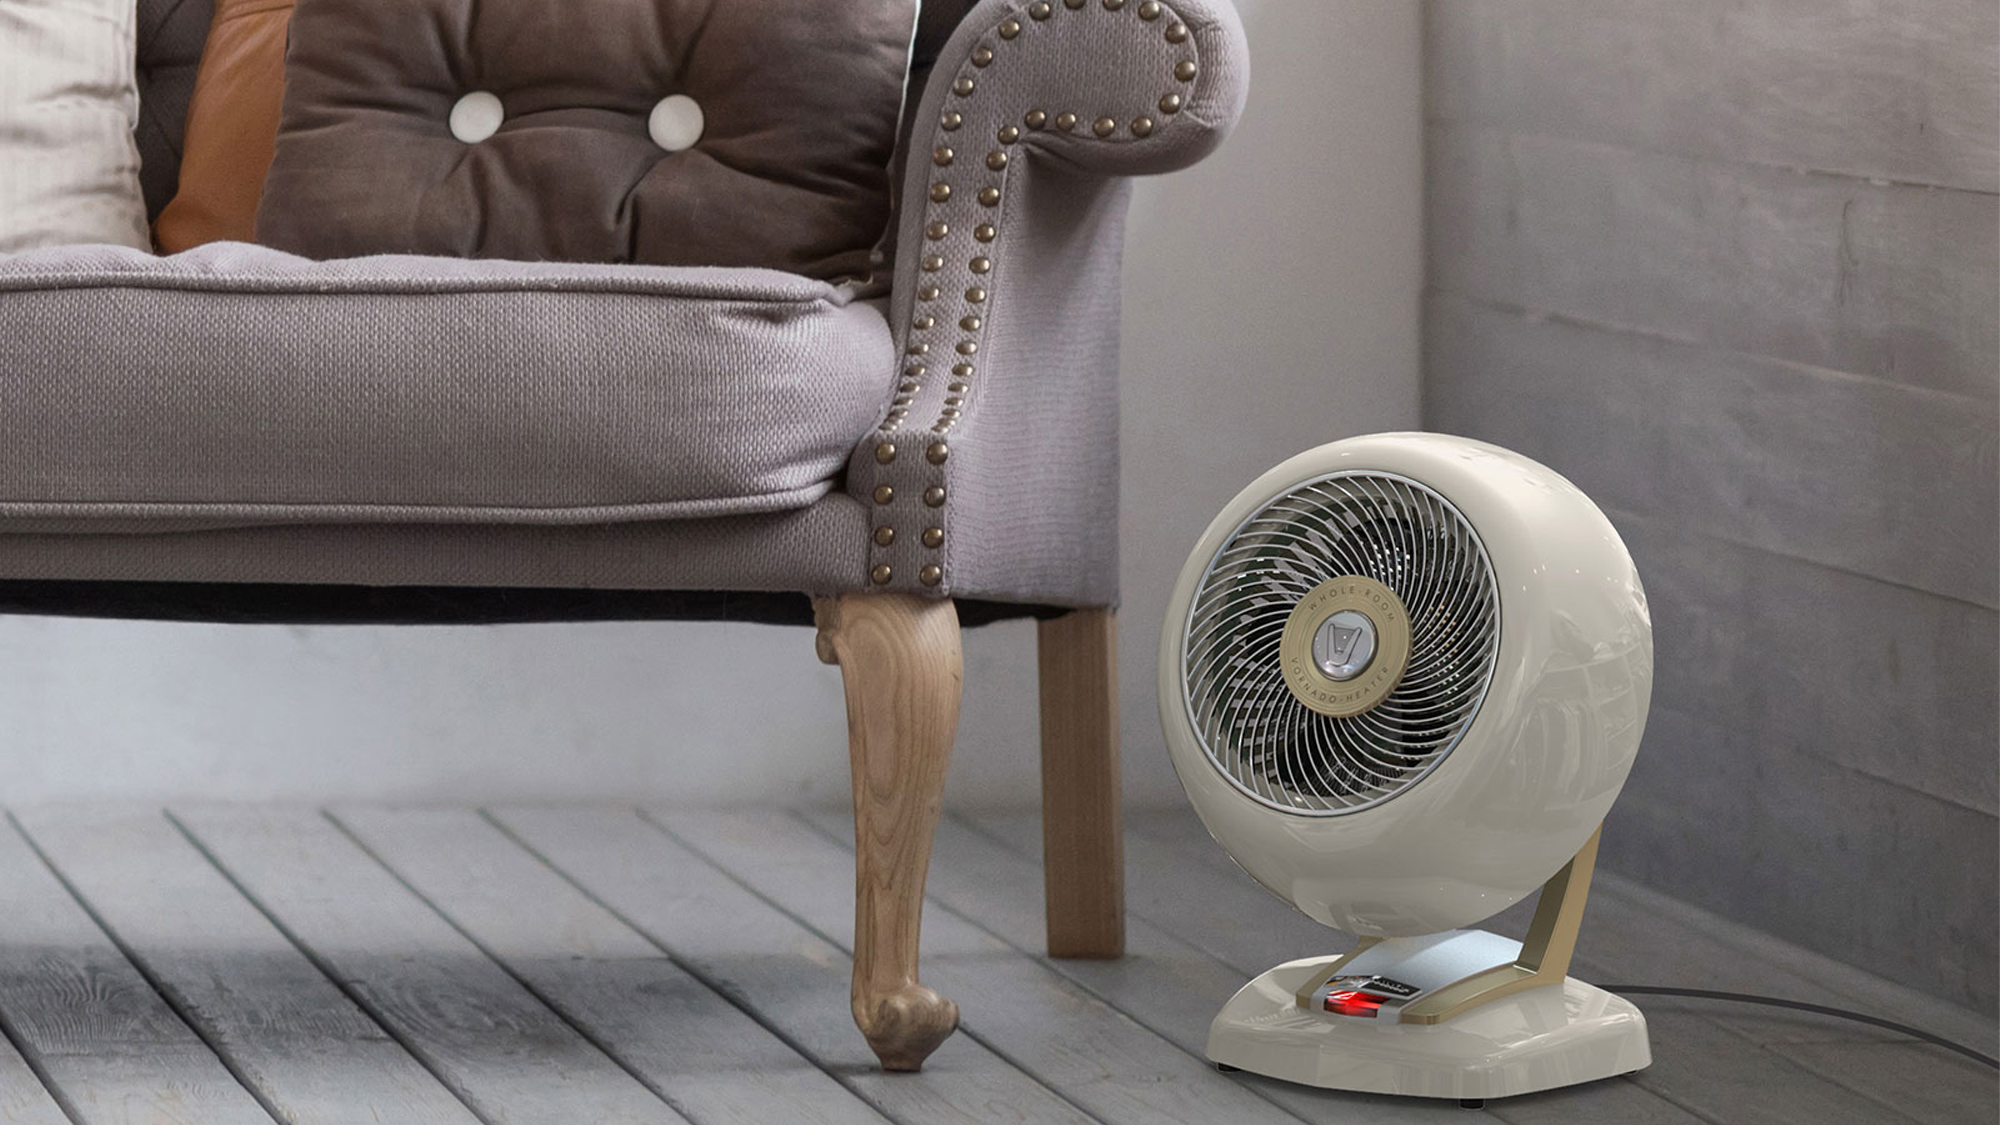 Is Well Heater a Scam or a Legit Buy? An In-Depth Review